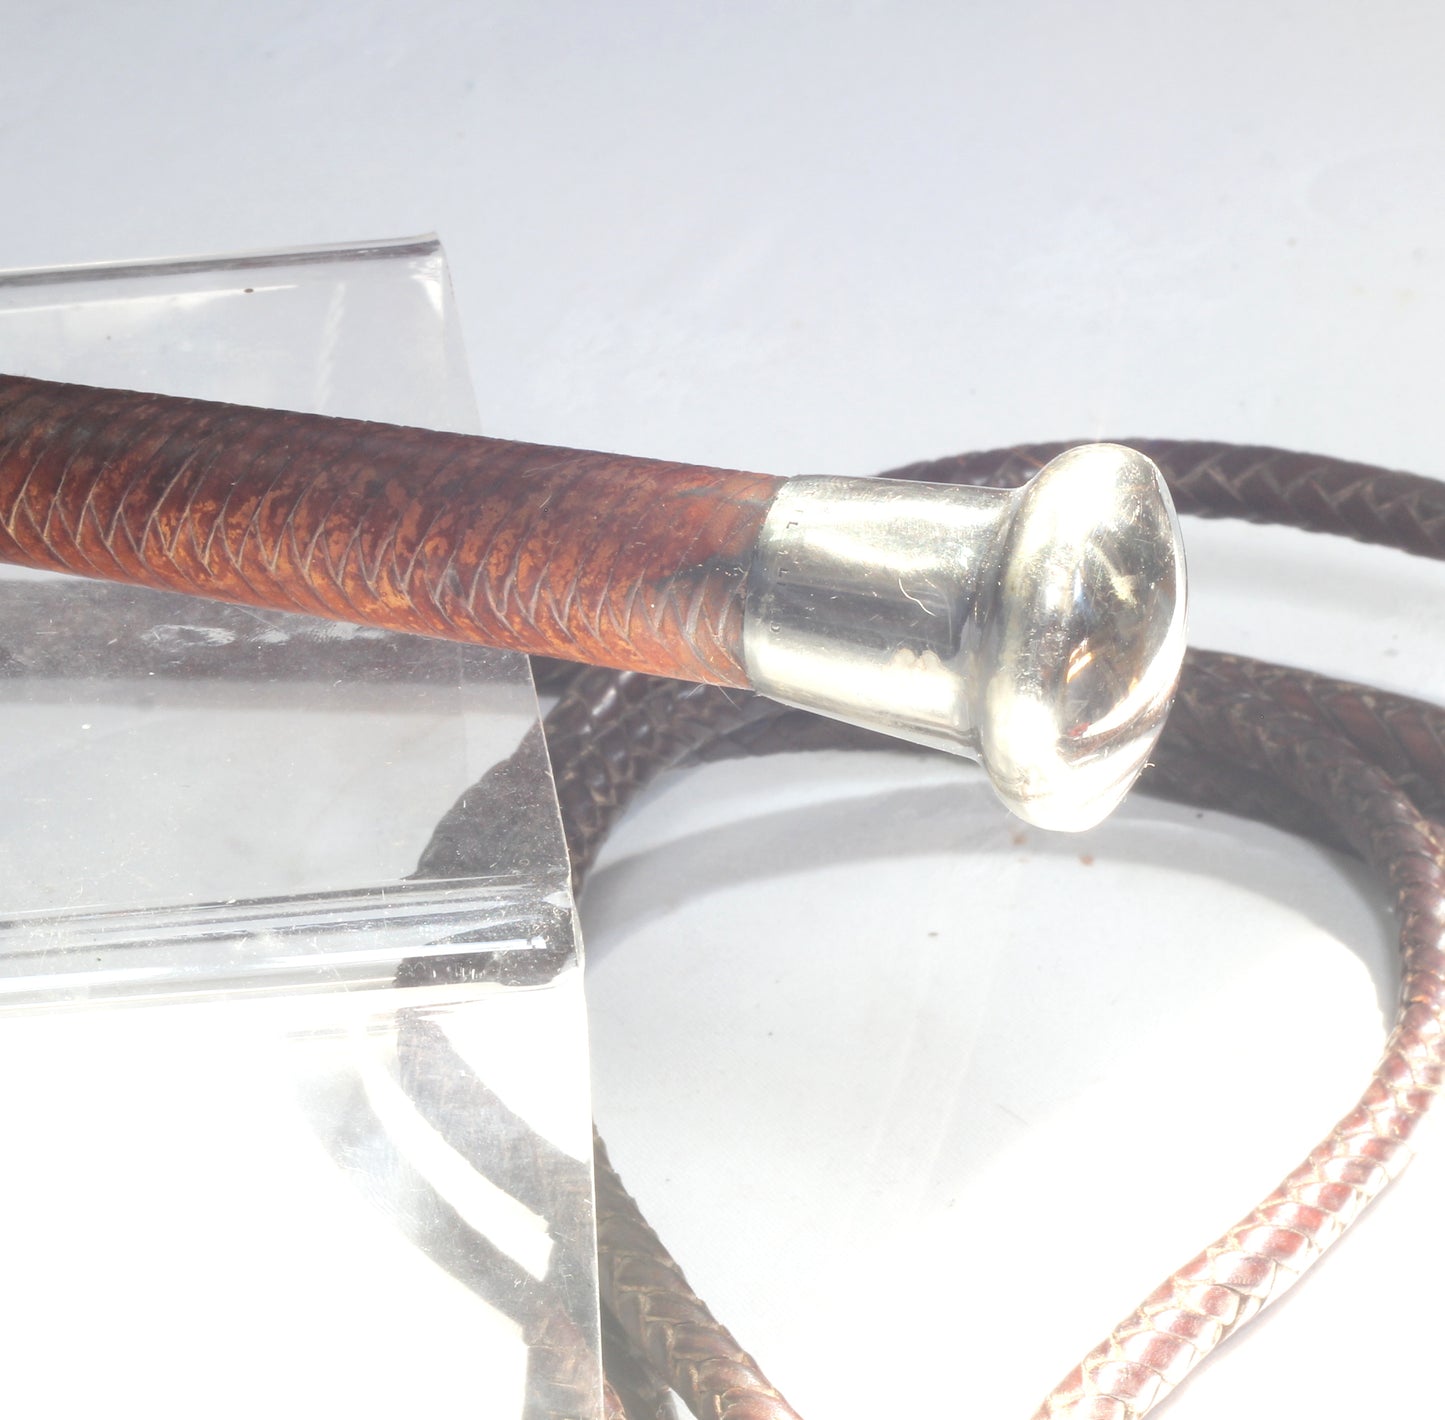 Long Vintage Stock Whip